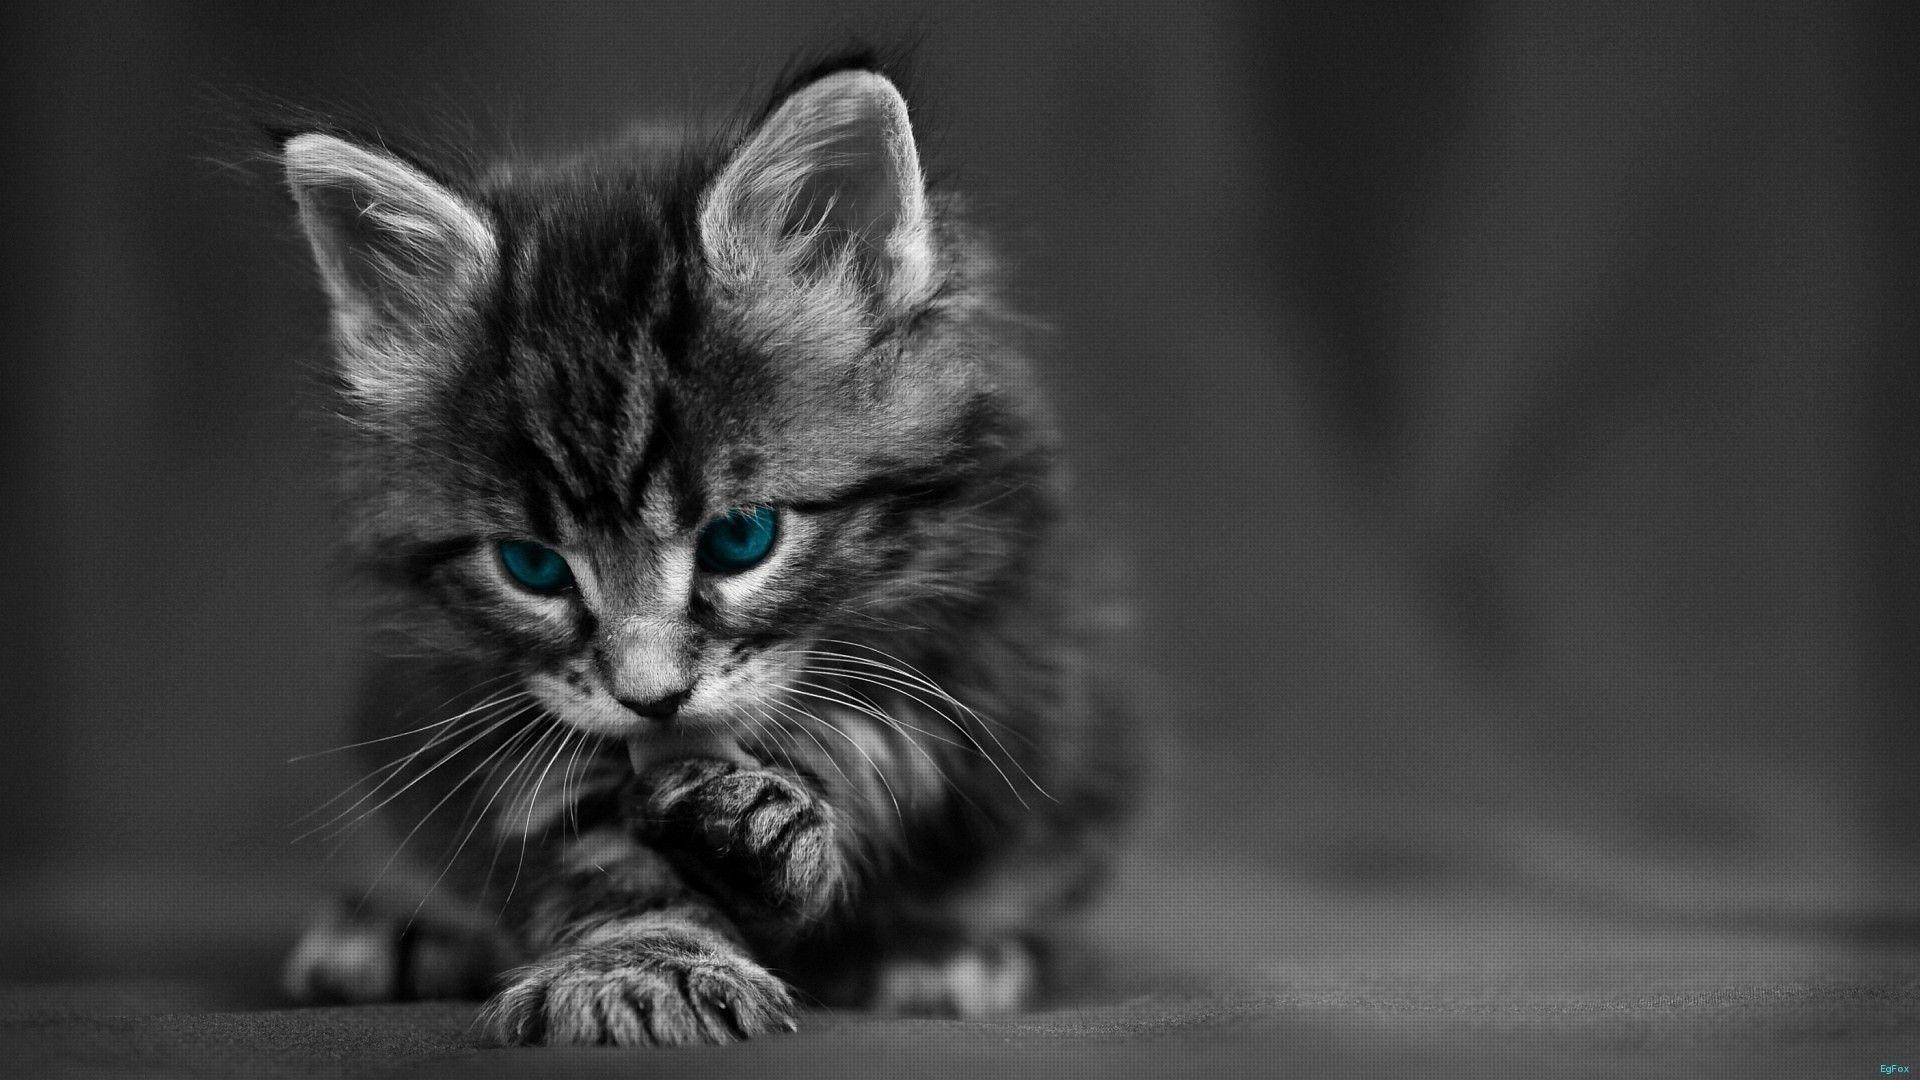 Wallpapers HD 1080p Black And White Cat